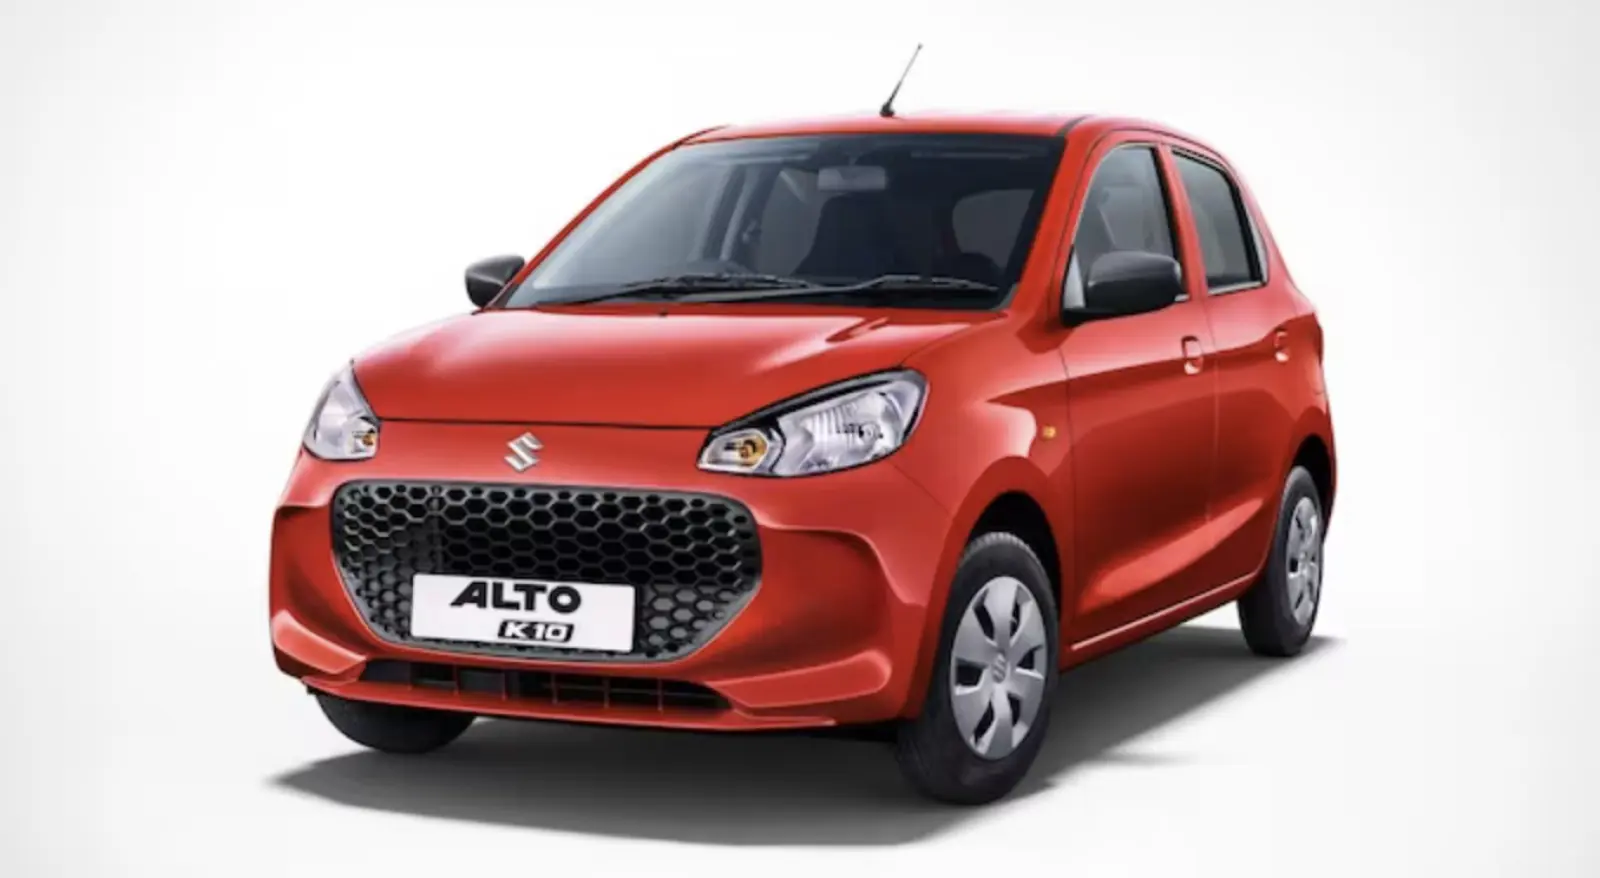 Great opportunity to buy Maruti Alto K10! A discount of up to Rs 54 thousand is available on the car